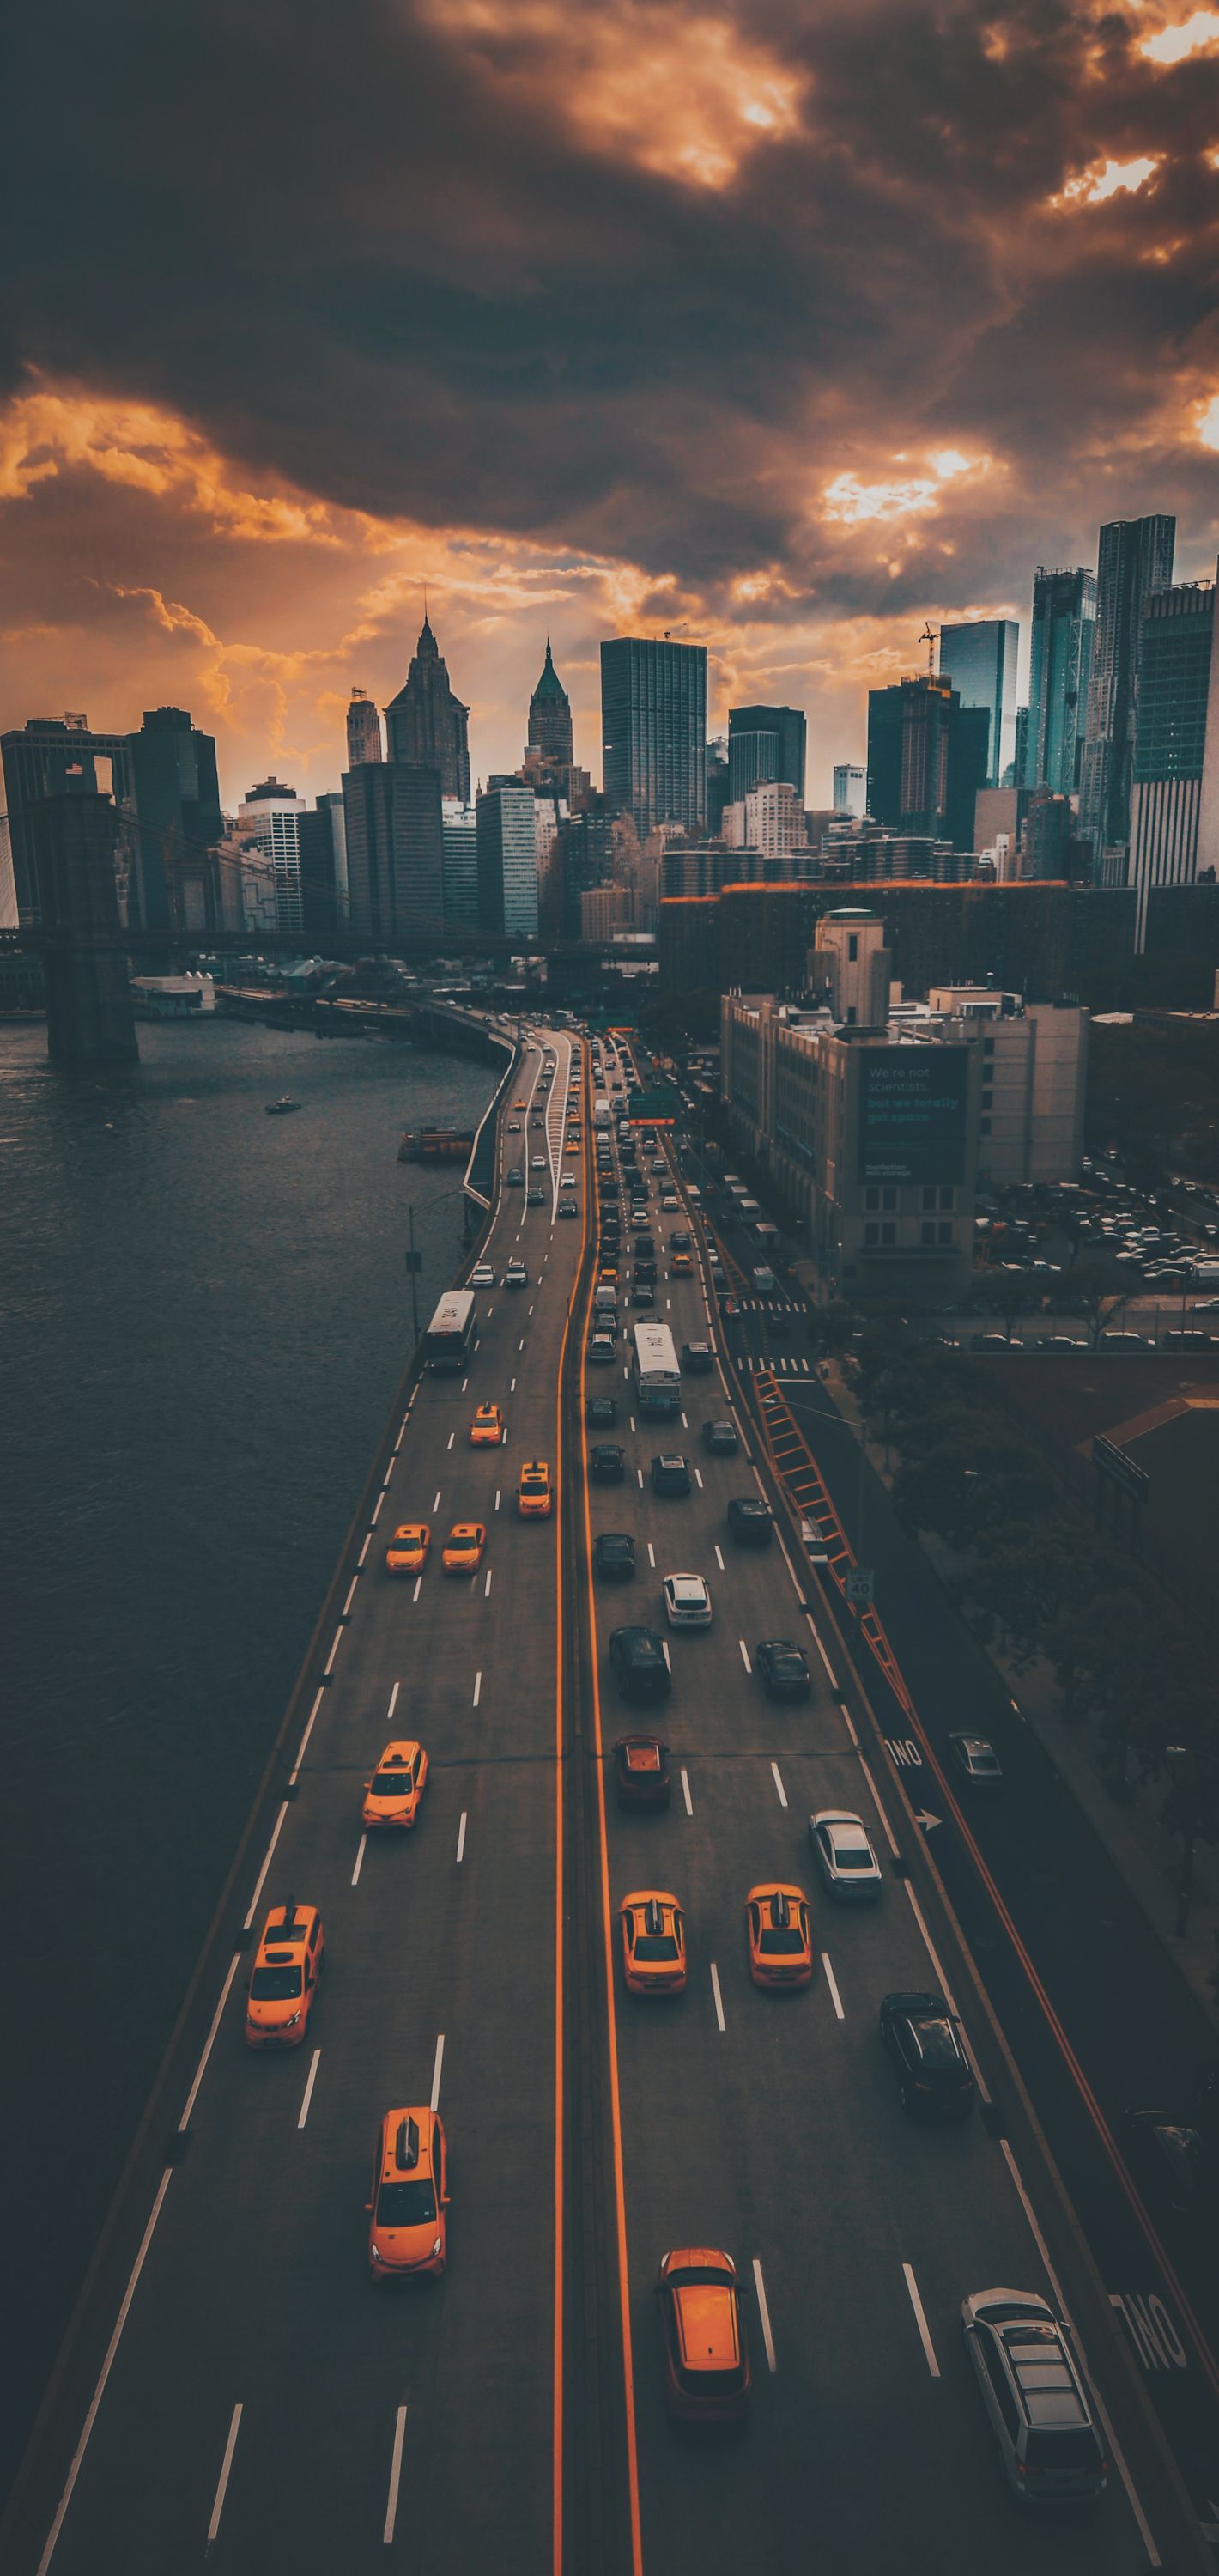 A city with a river, highway, and skyscrapers - New York, city